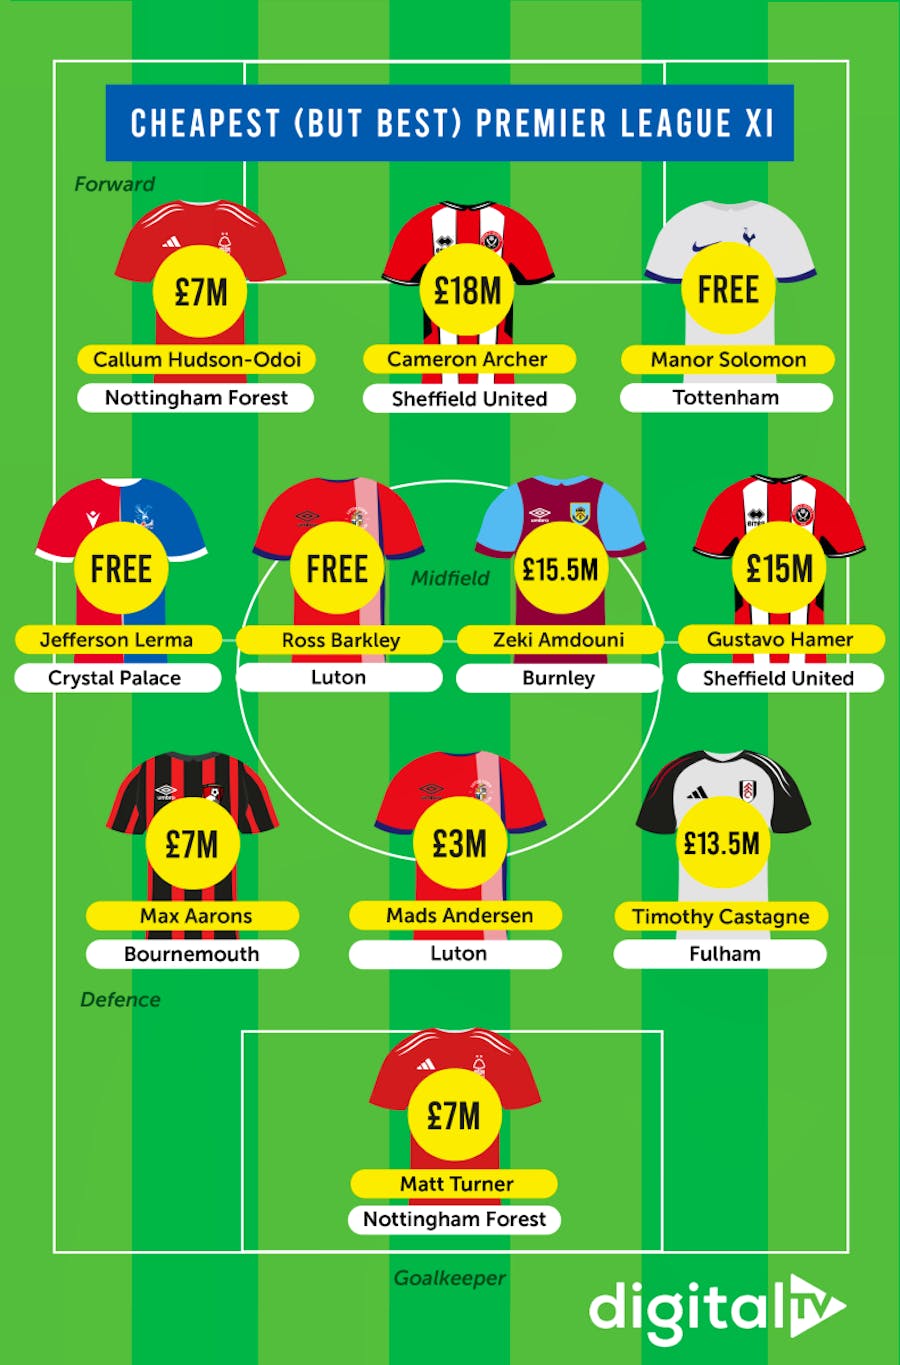 Illustration showing our choice of the cheapest but best premier league XI players.